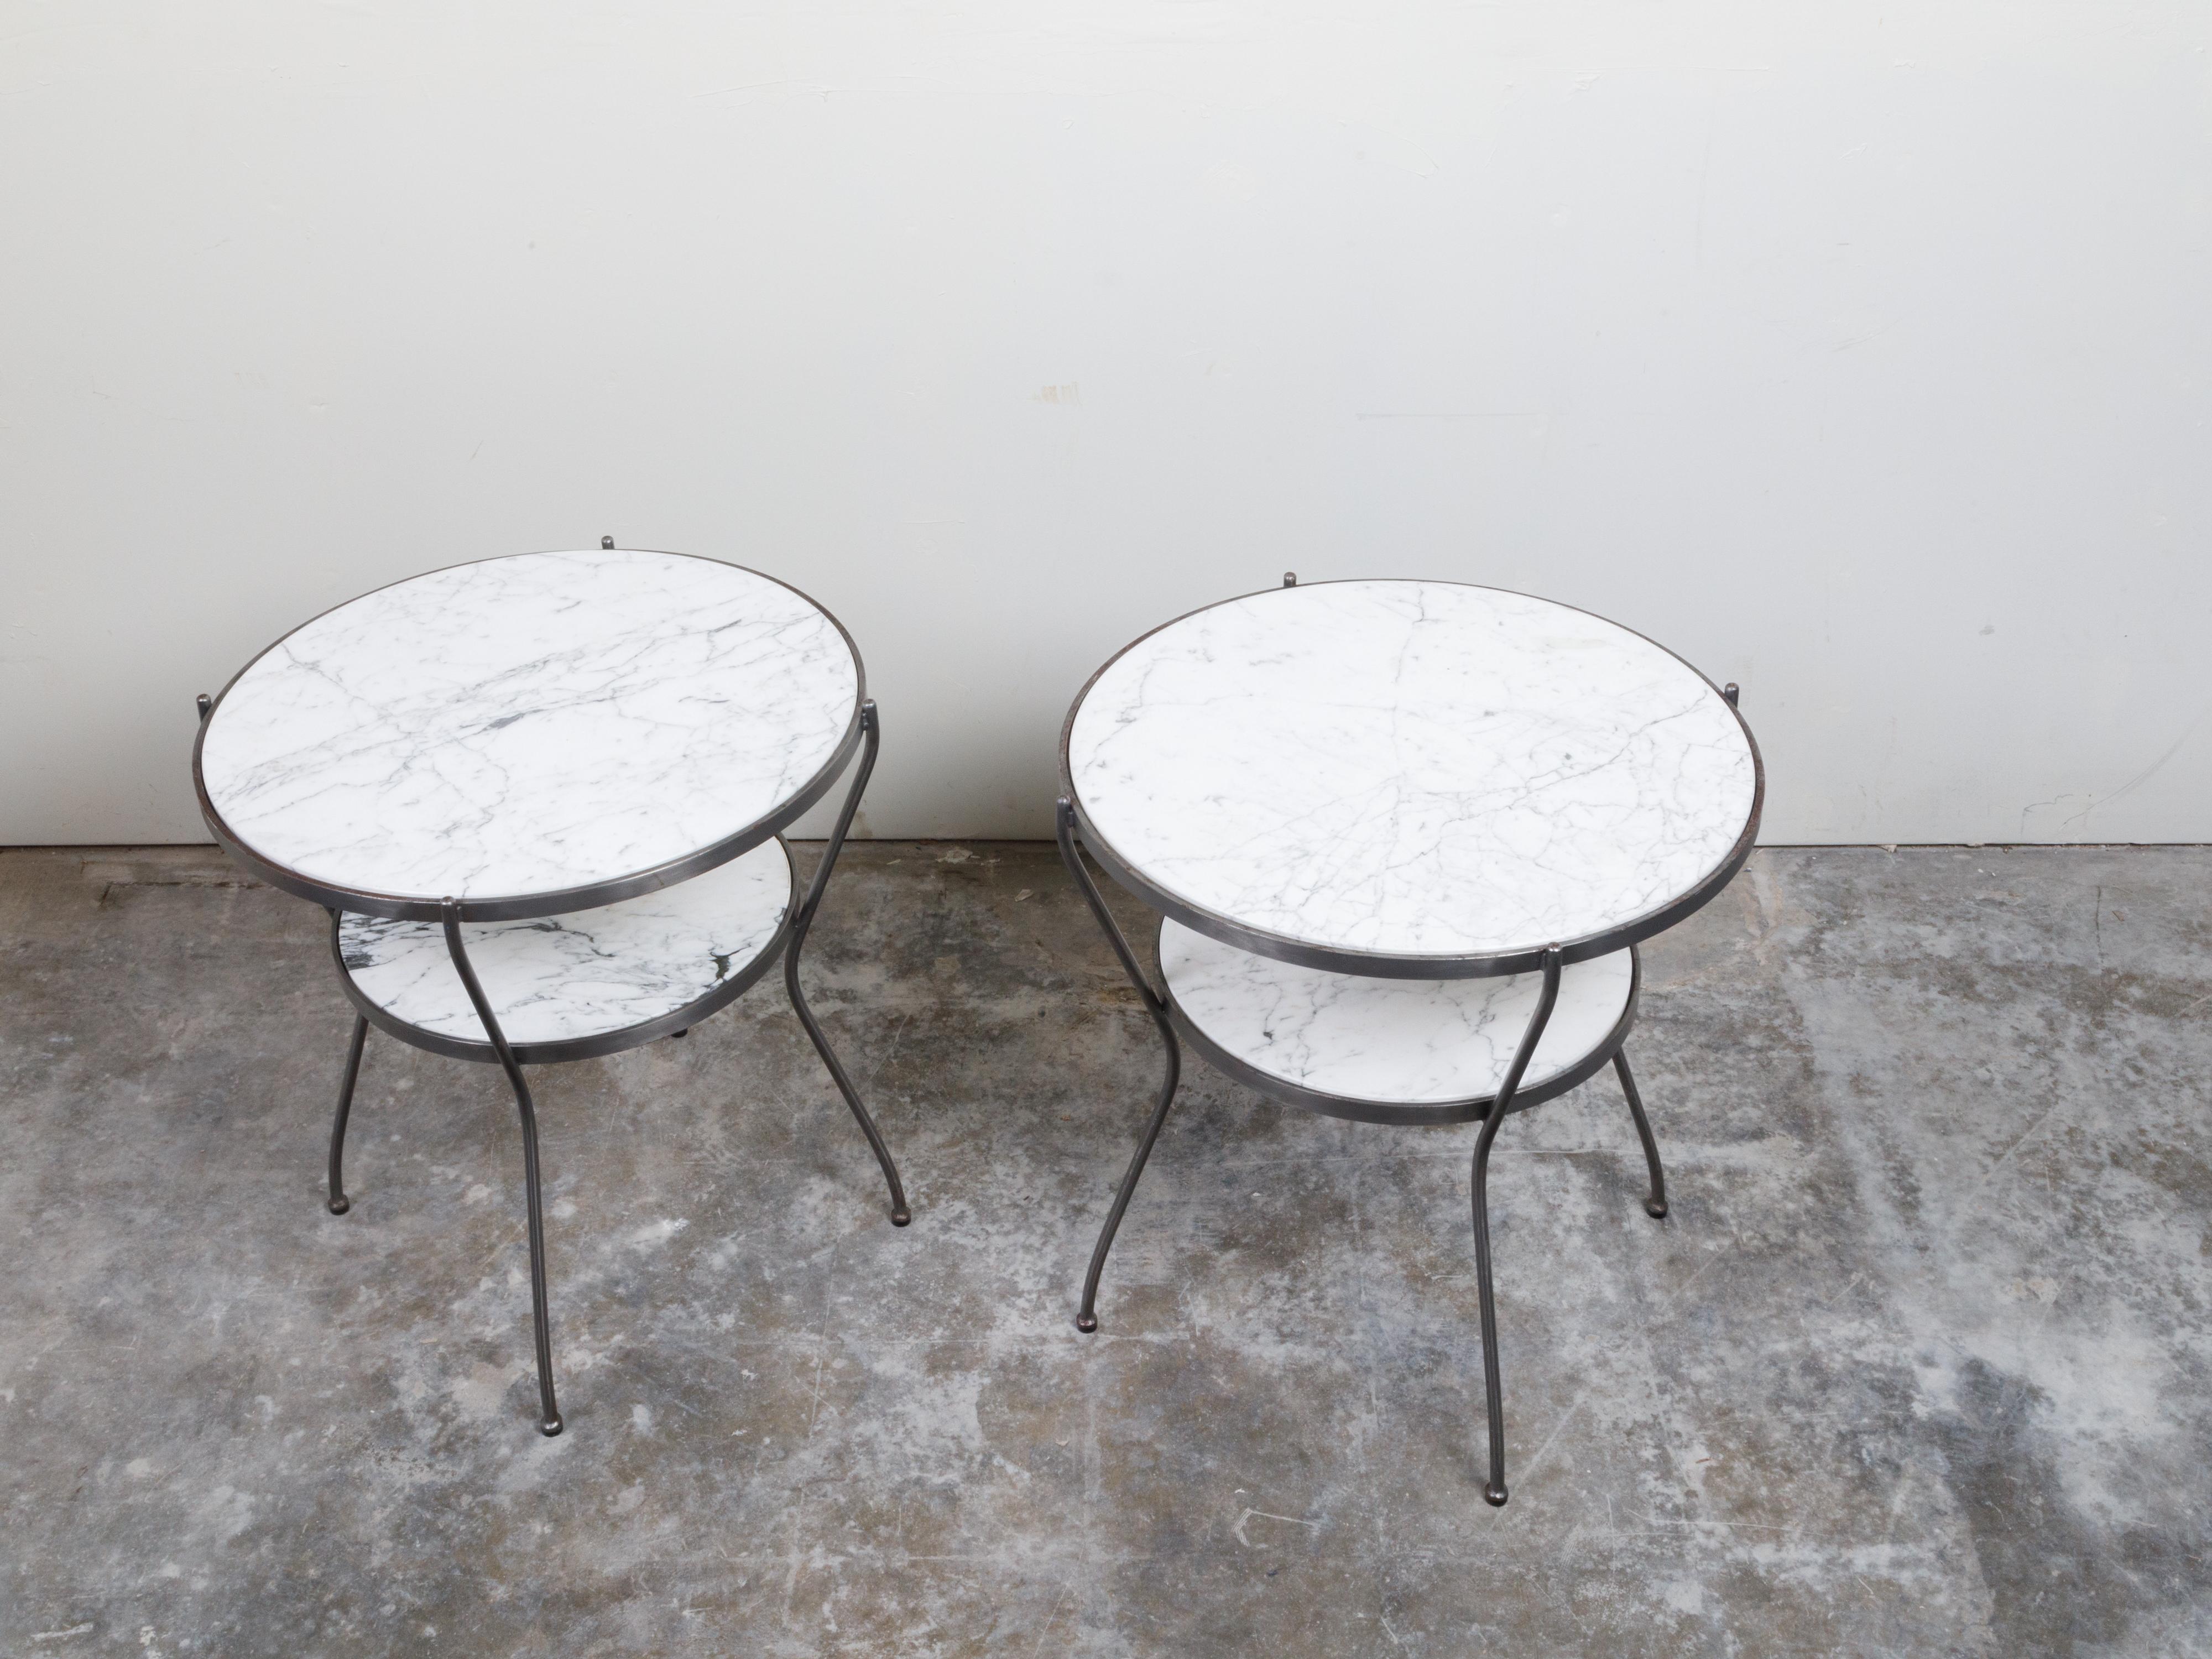 Pair of Italian Midcentury Steel Side Tables with Marble Tops and Shelves In Good Condition For Sale In Atlanta, GA